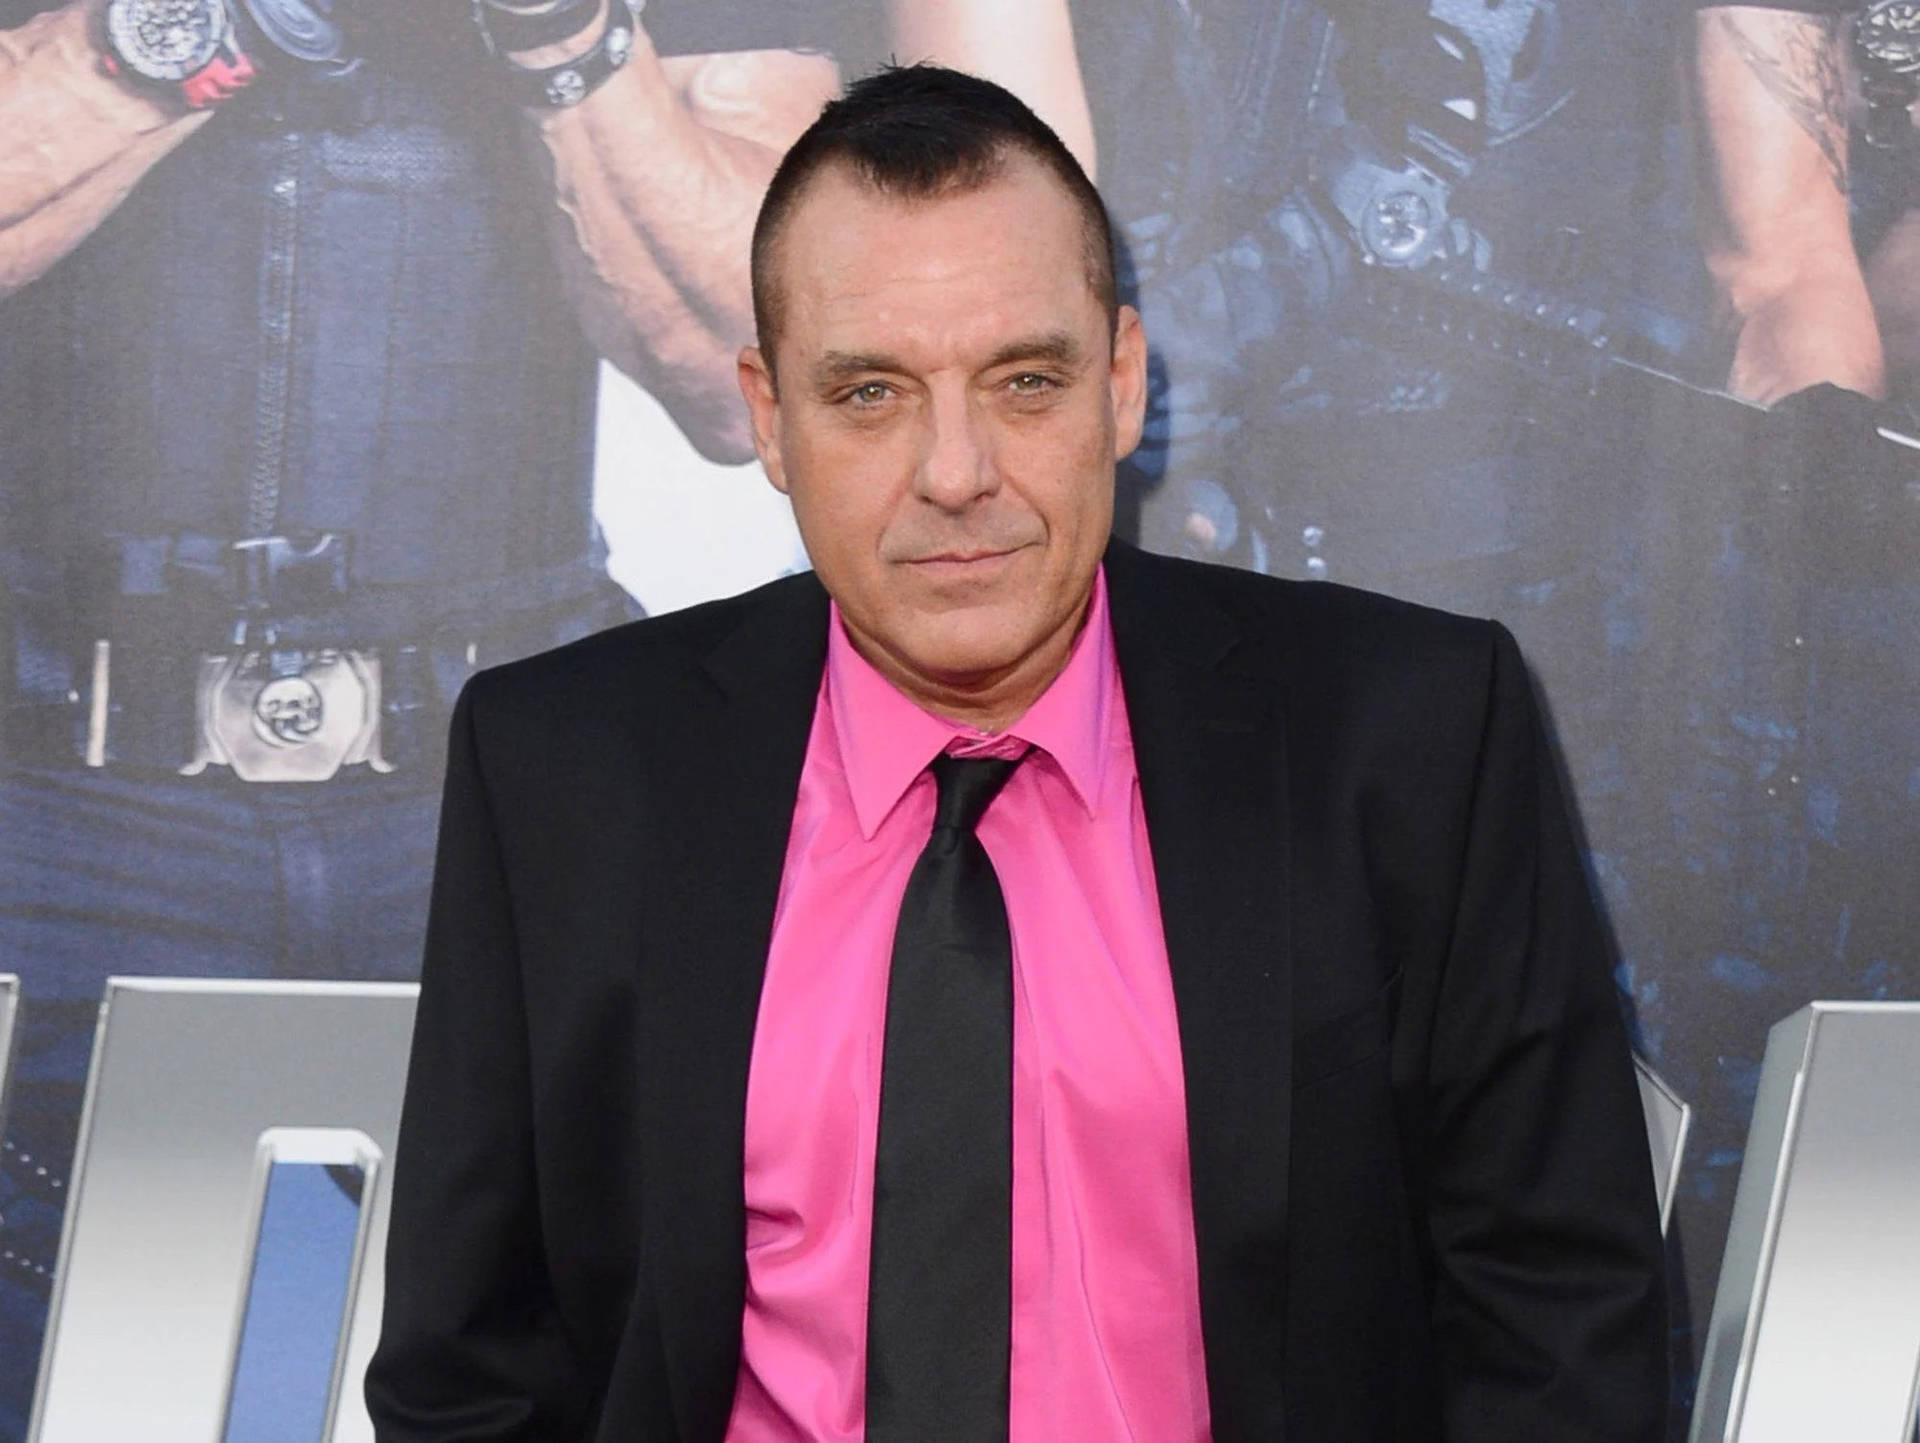 American Actor Tom Sizemore The Expendables 3 Portrait Wallpaper